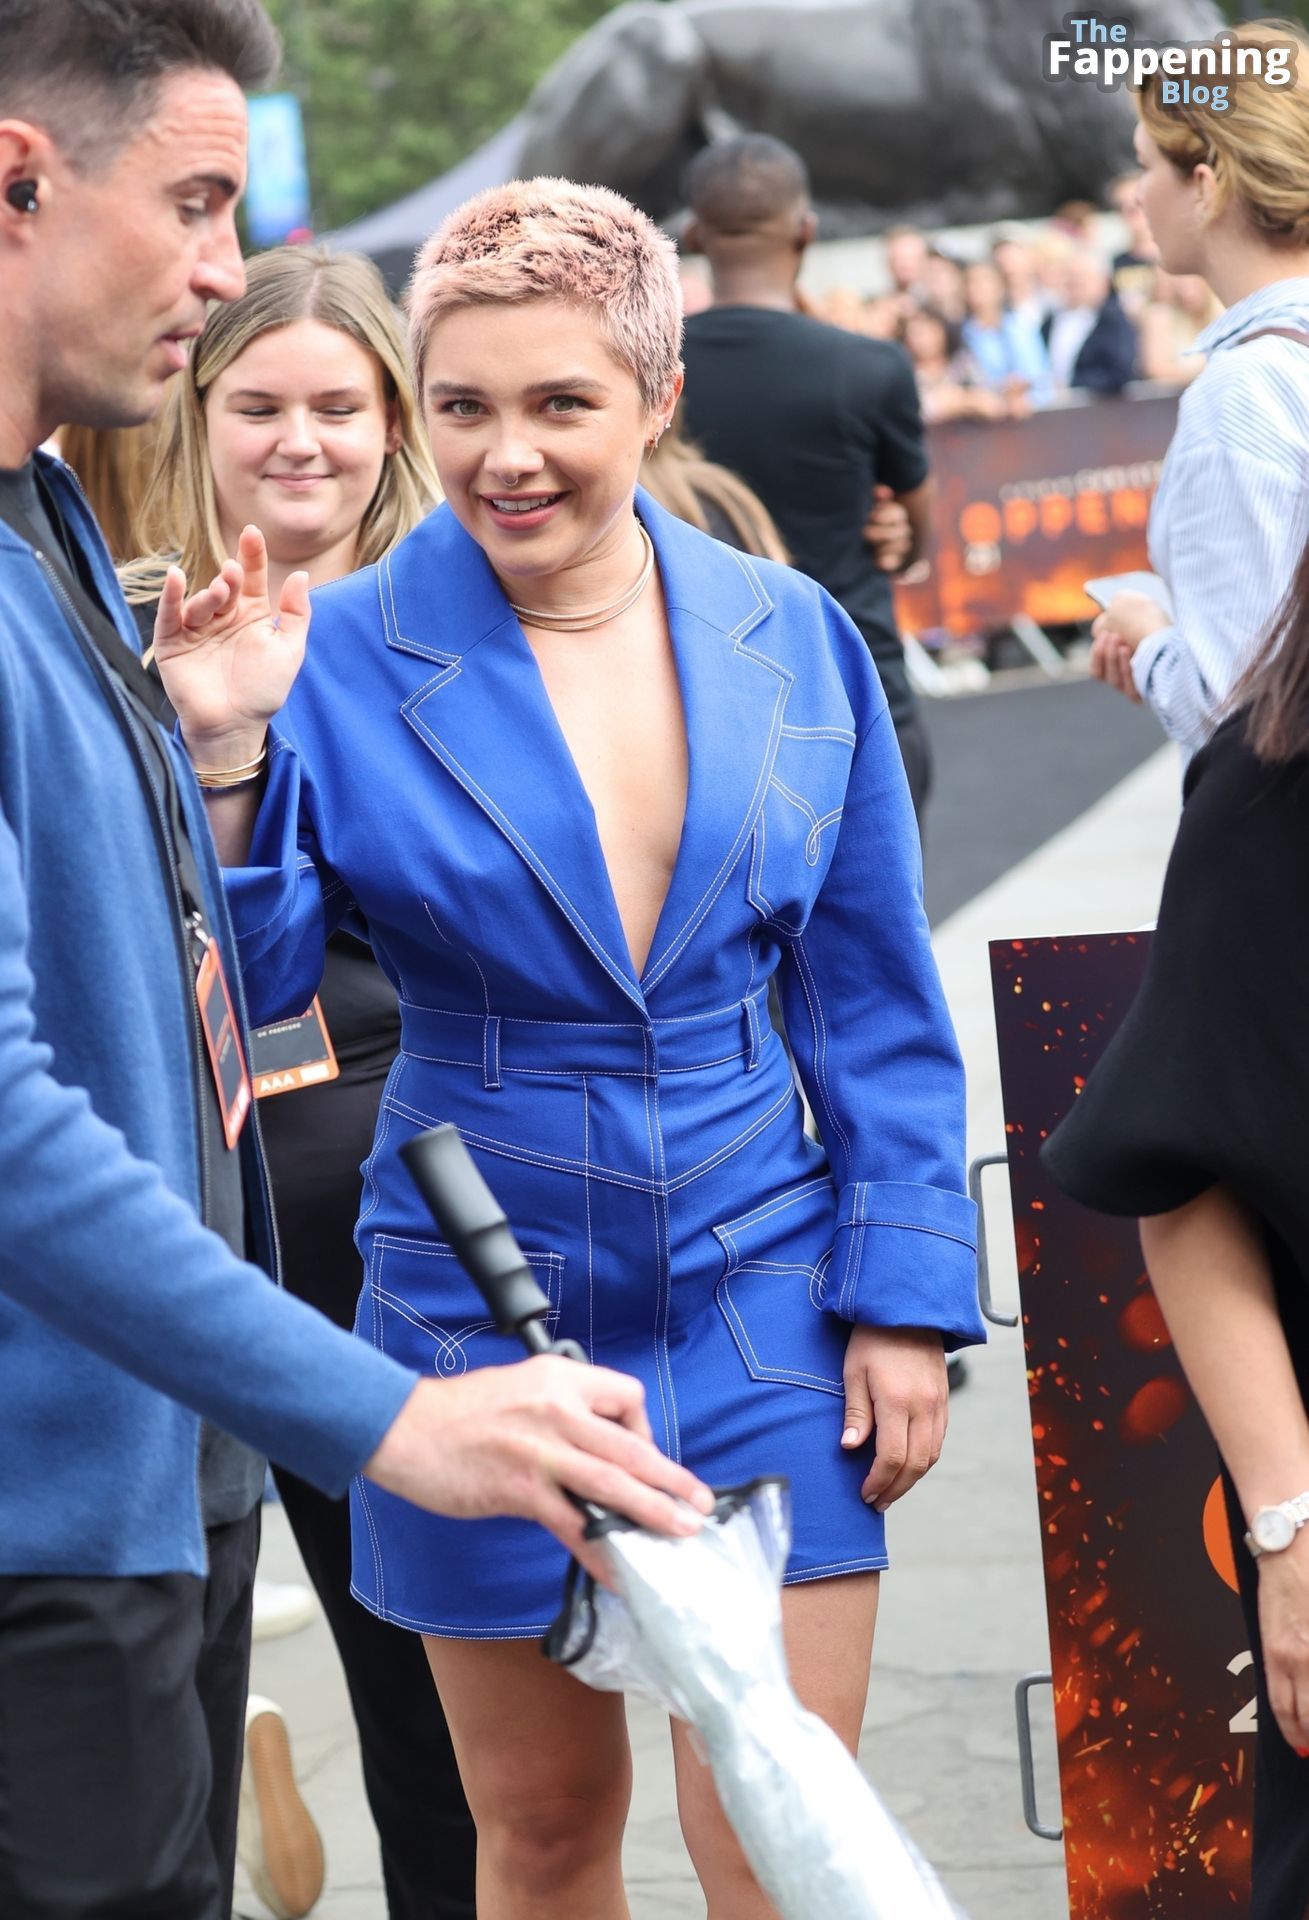 Florence-Pugh-Sexy-The-Fappening-Blog-43.jpg